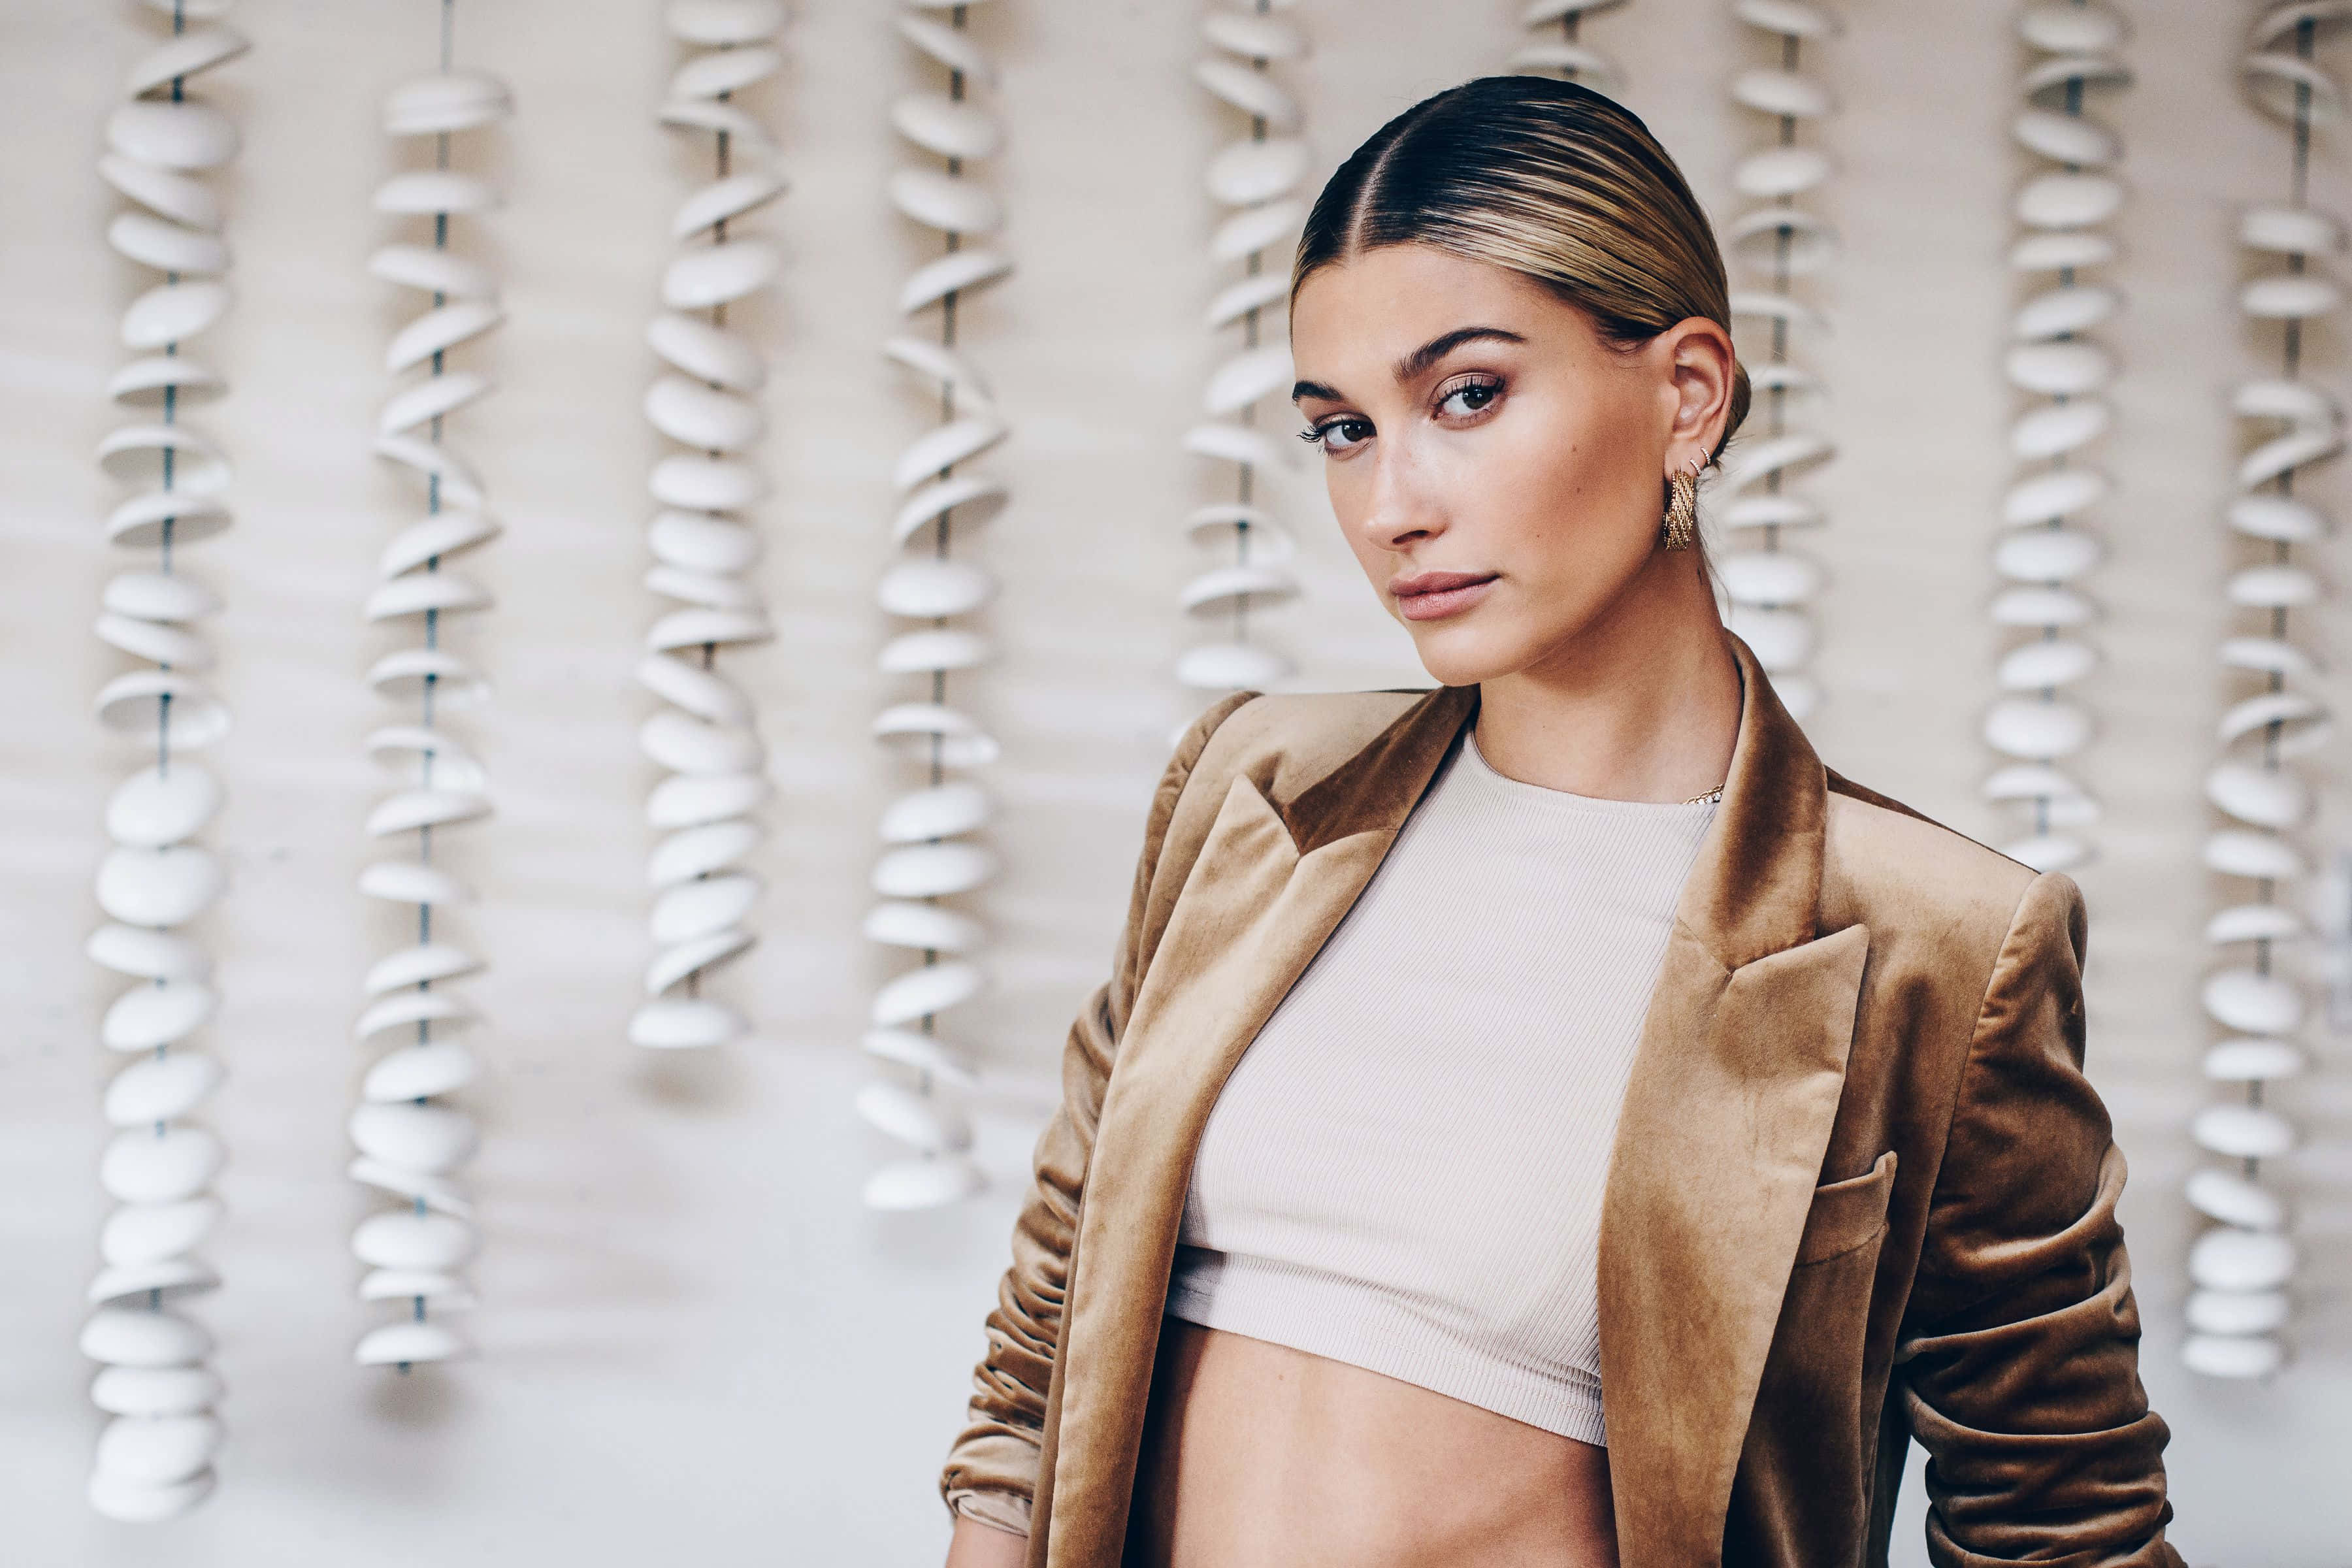 Hailey Baldwin Posing Against A Backdrop Featuring The Night City Skyline. Wallpaper